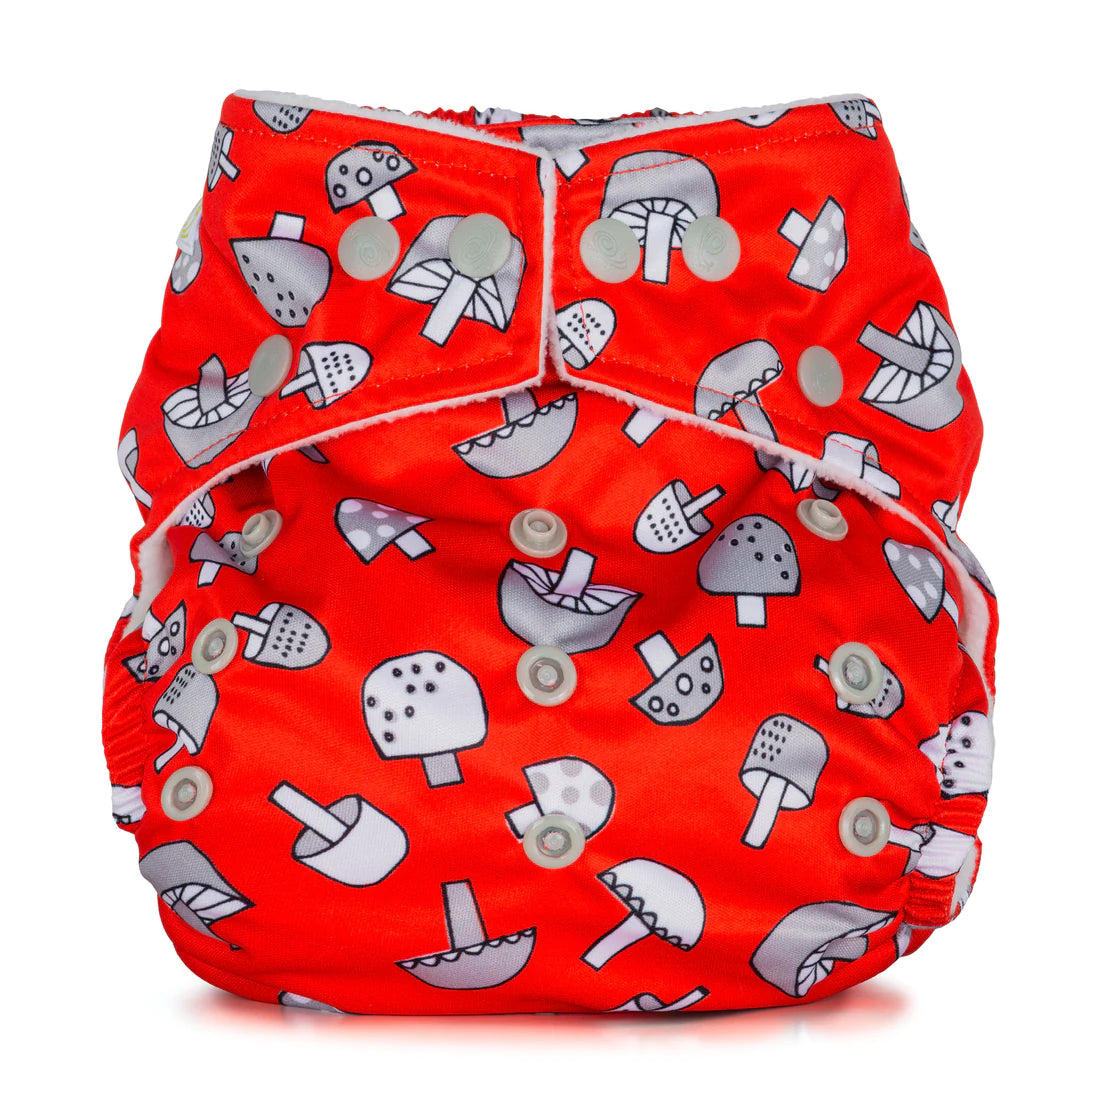 Baba+Boo One Size Nappy